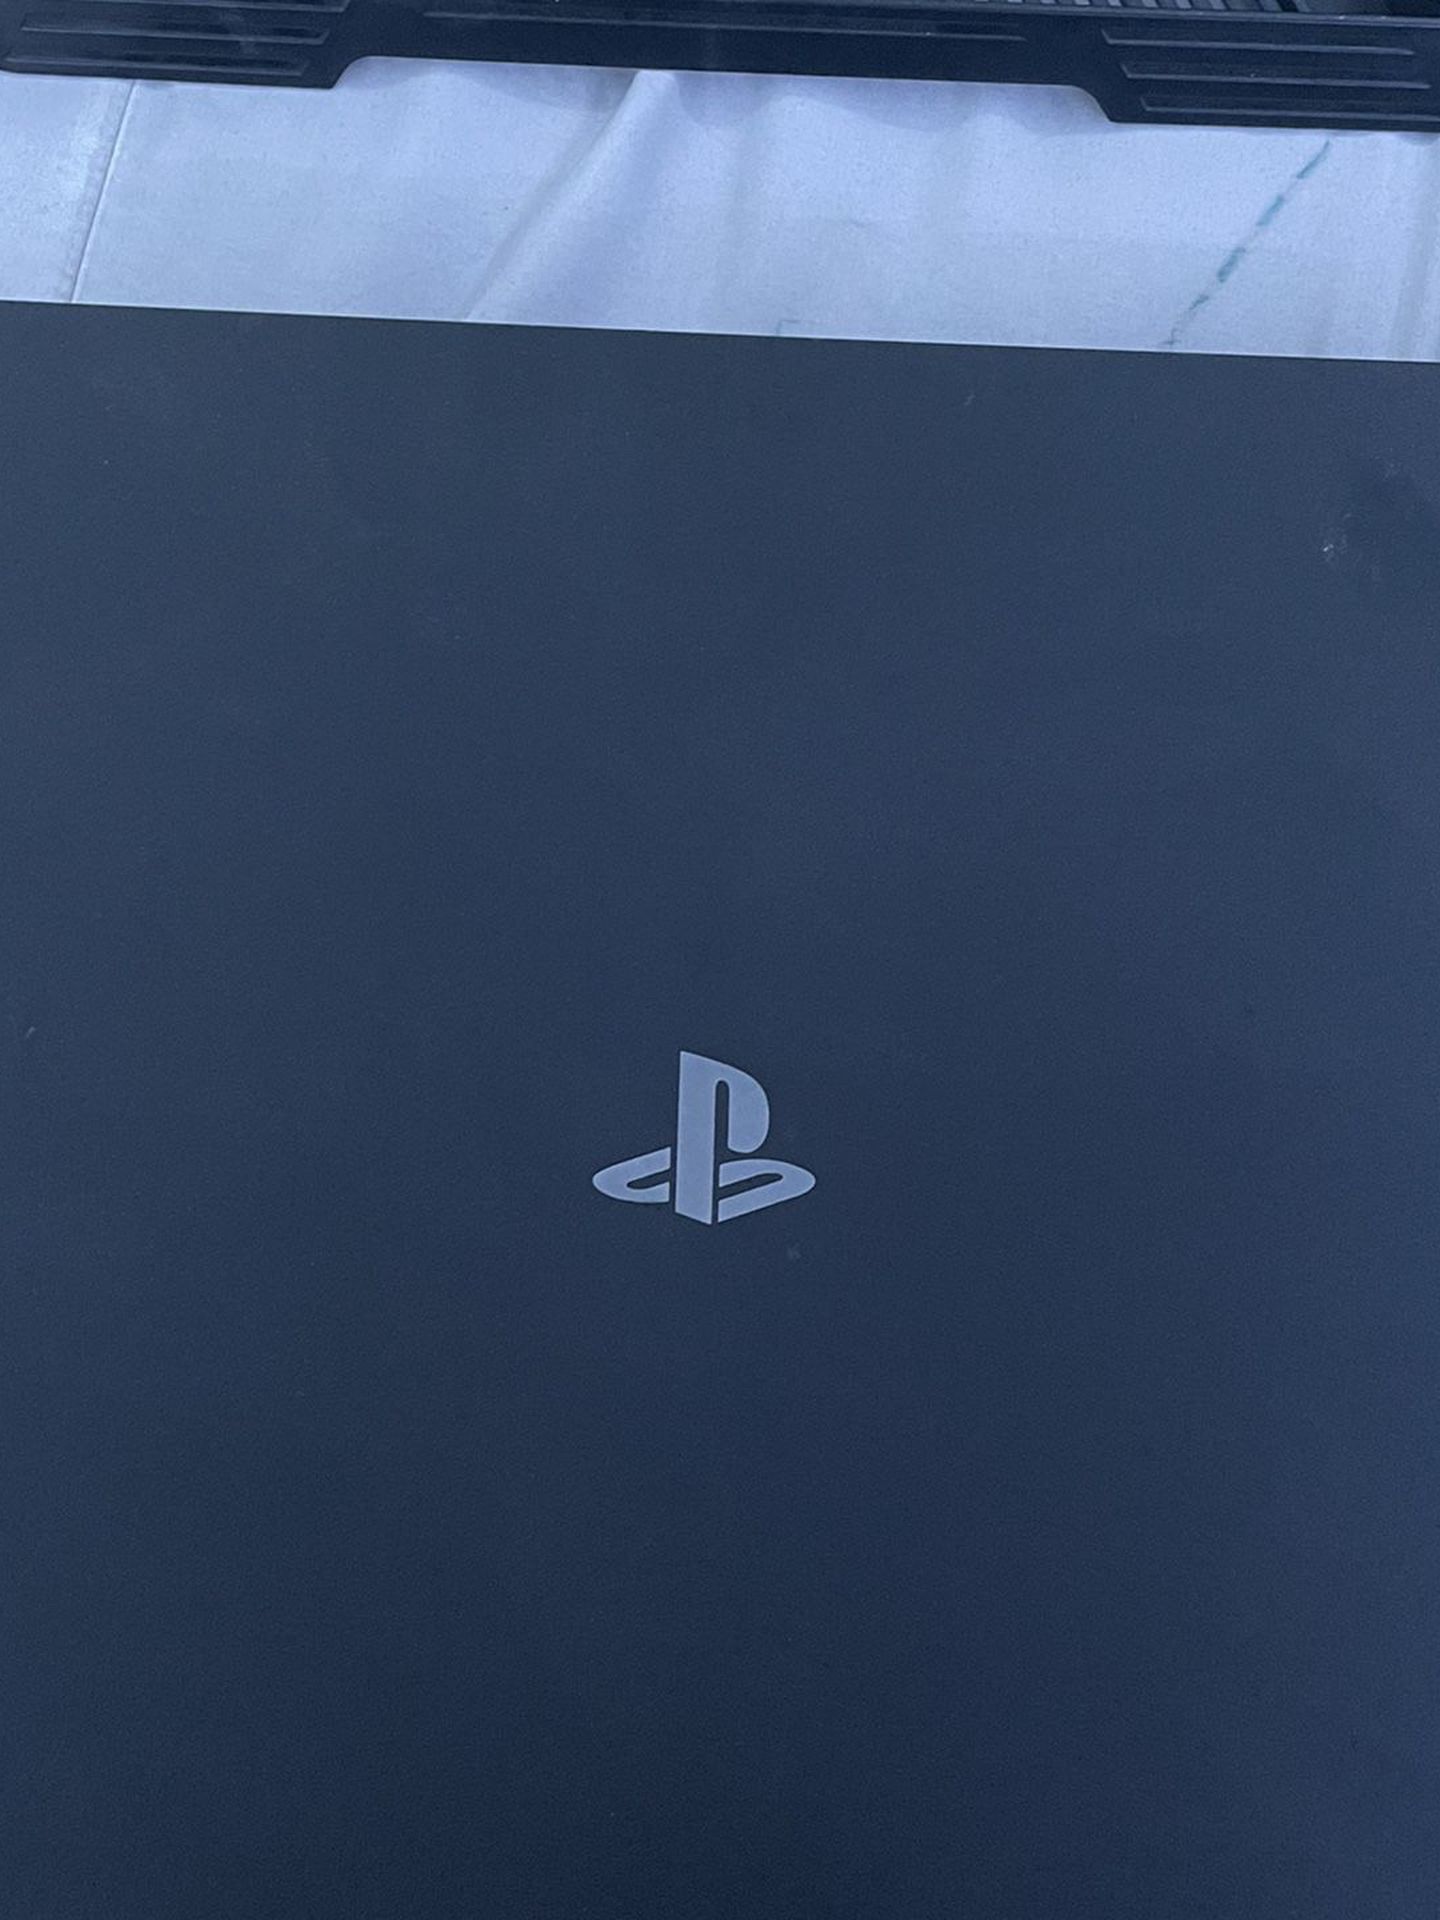 PS4 Pro 1TB And Other Accessories